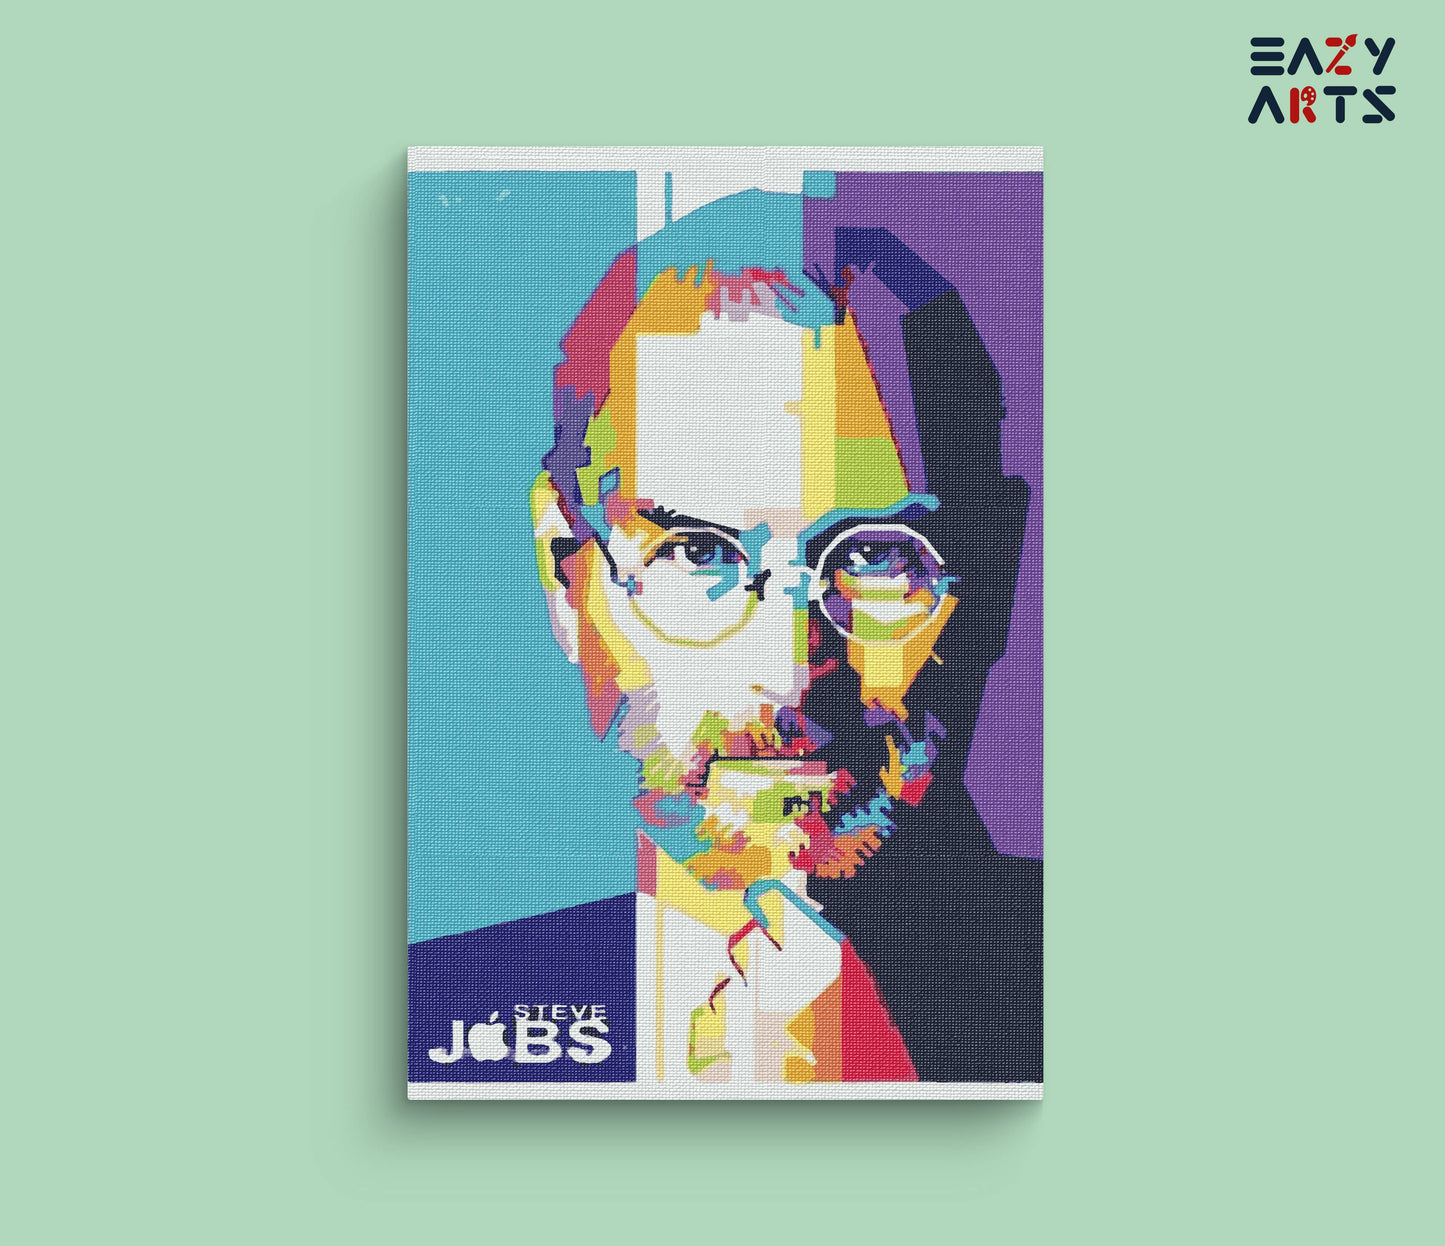 Steve Jobs Abstract paint by numbers